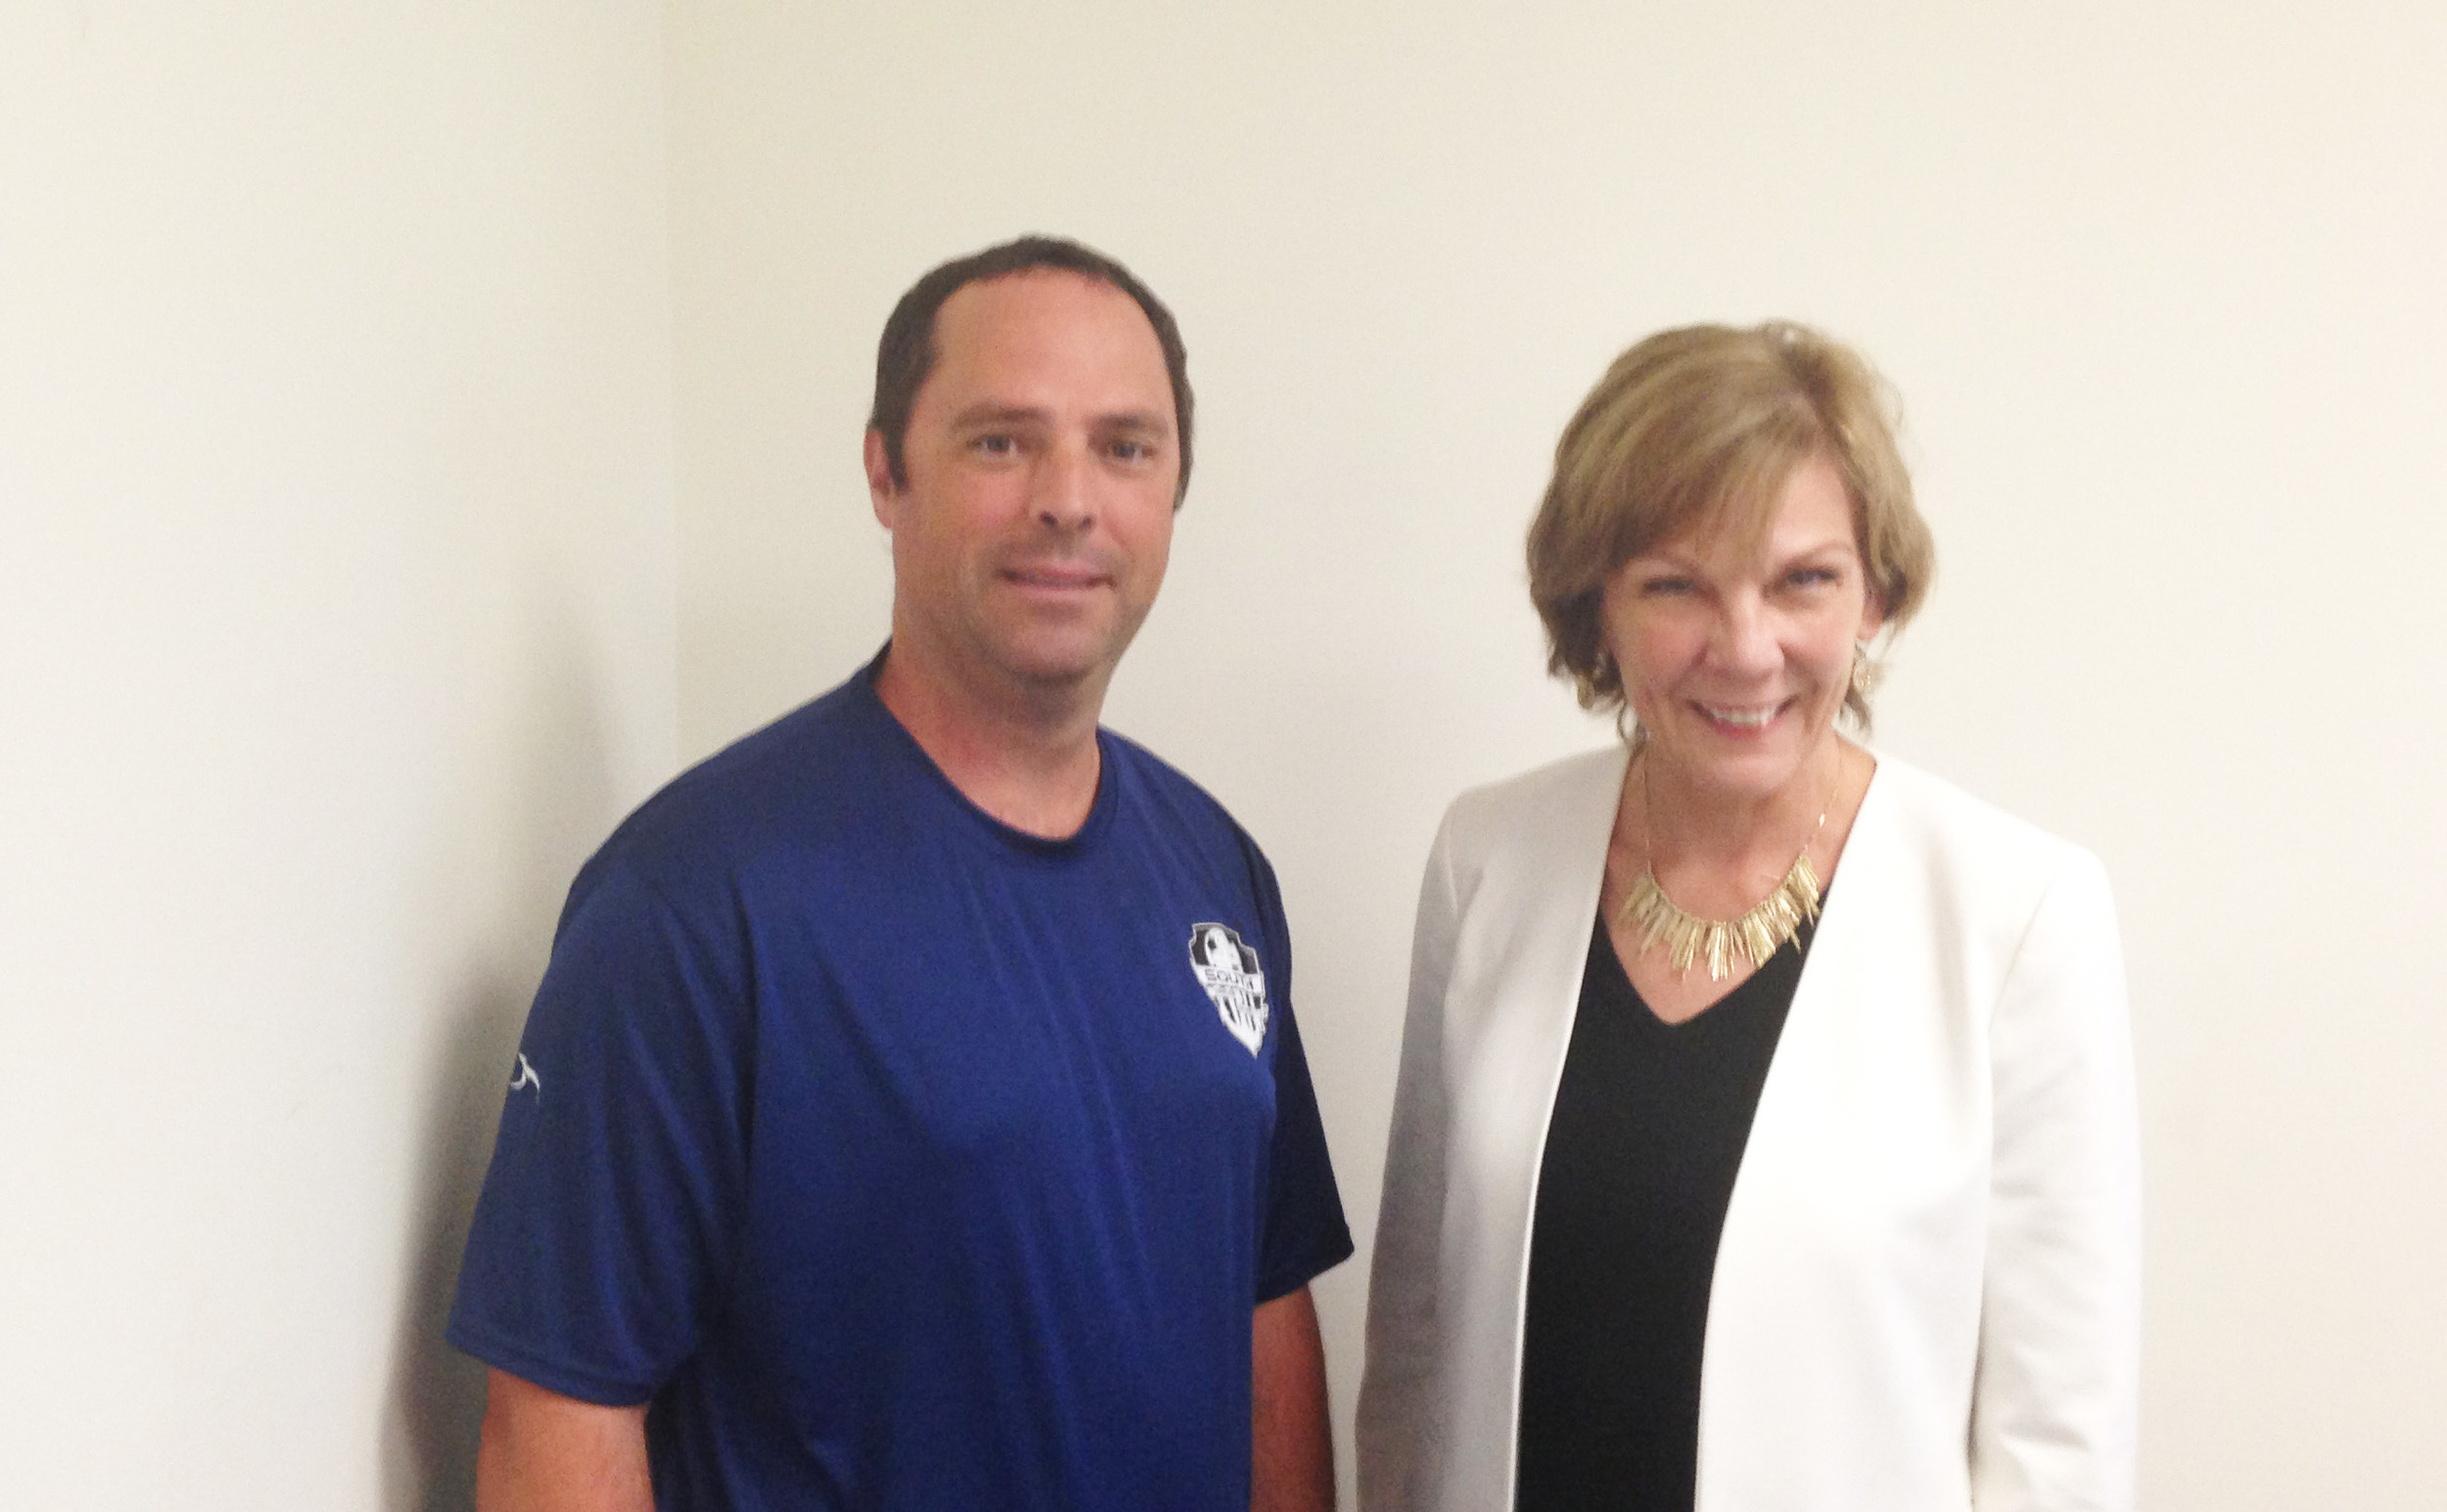 Dr. Michael Bradley, president and CEO of Ortho Rhode Island, left, and Mary Ellen Ashe, the executive director of Ortho Rhode Island, at their Wakefield offices.